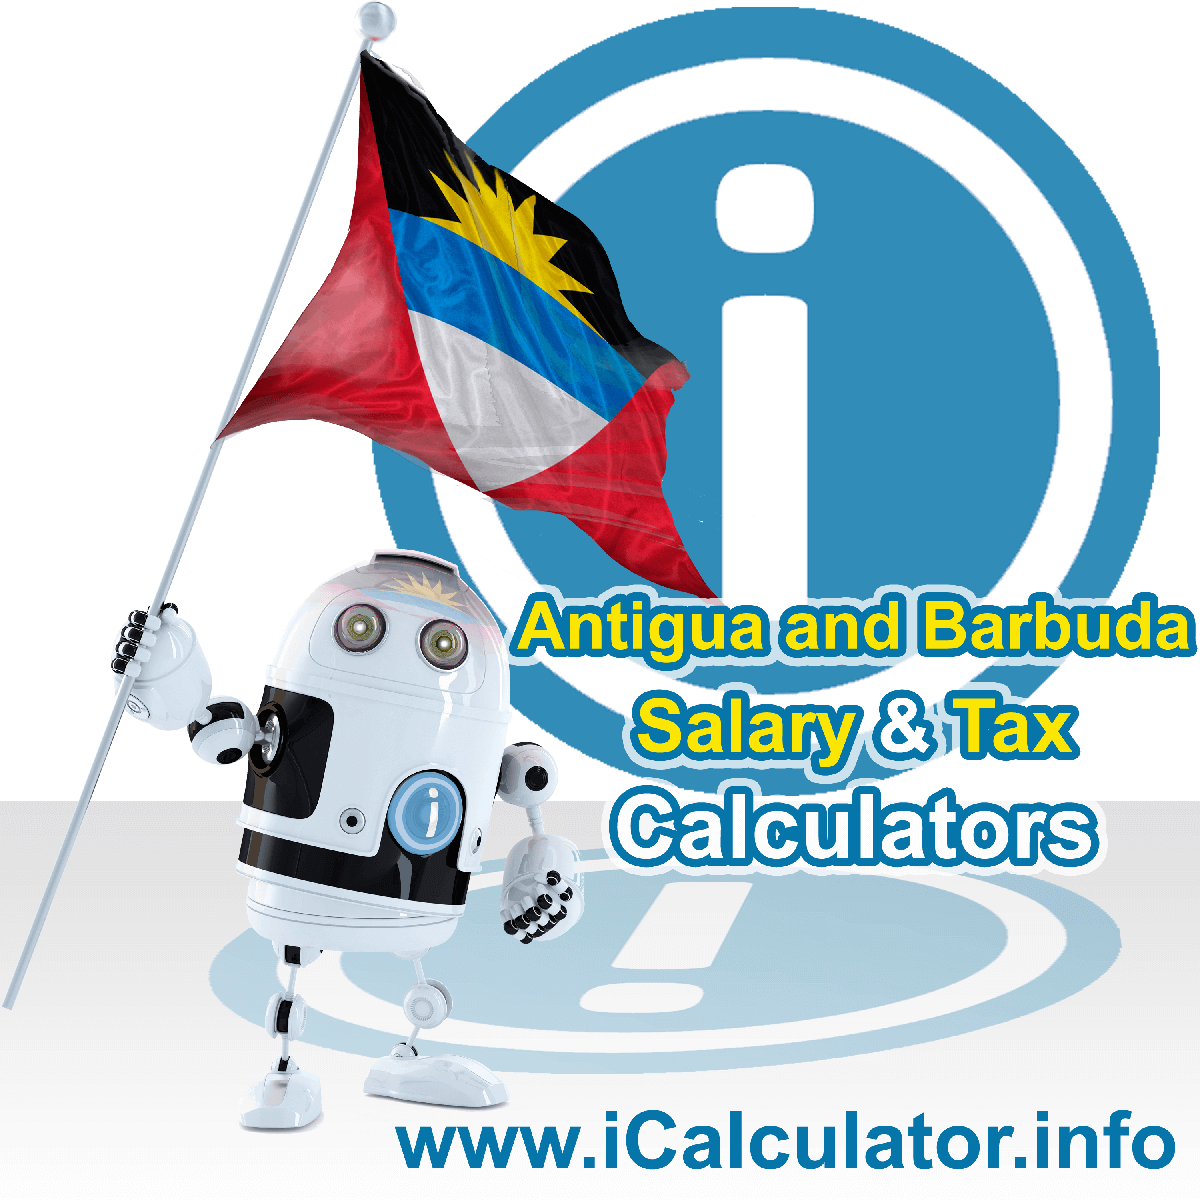 Antigua and Barbuda Salary Calculator. This image shows the Antigua and Barbudaese flag and information relating to the tax formula for the Antigua and Barbuda Tax Calculator